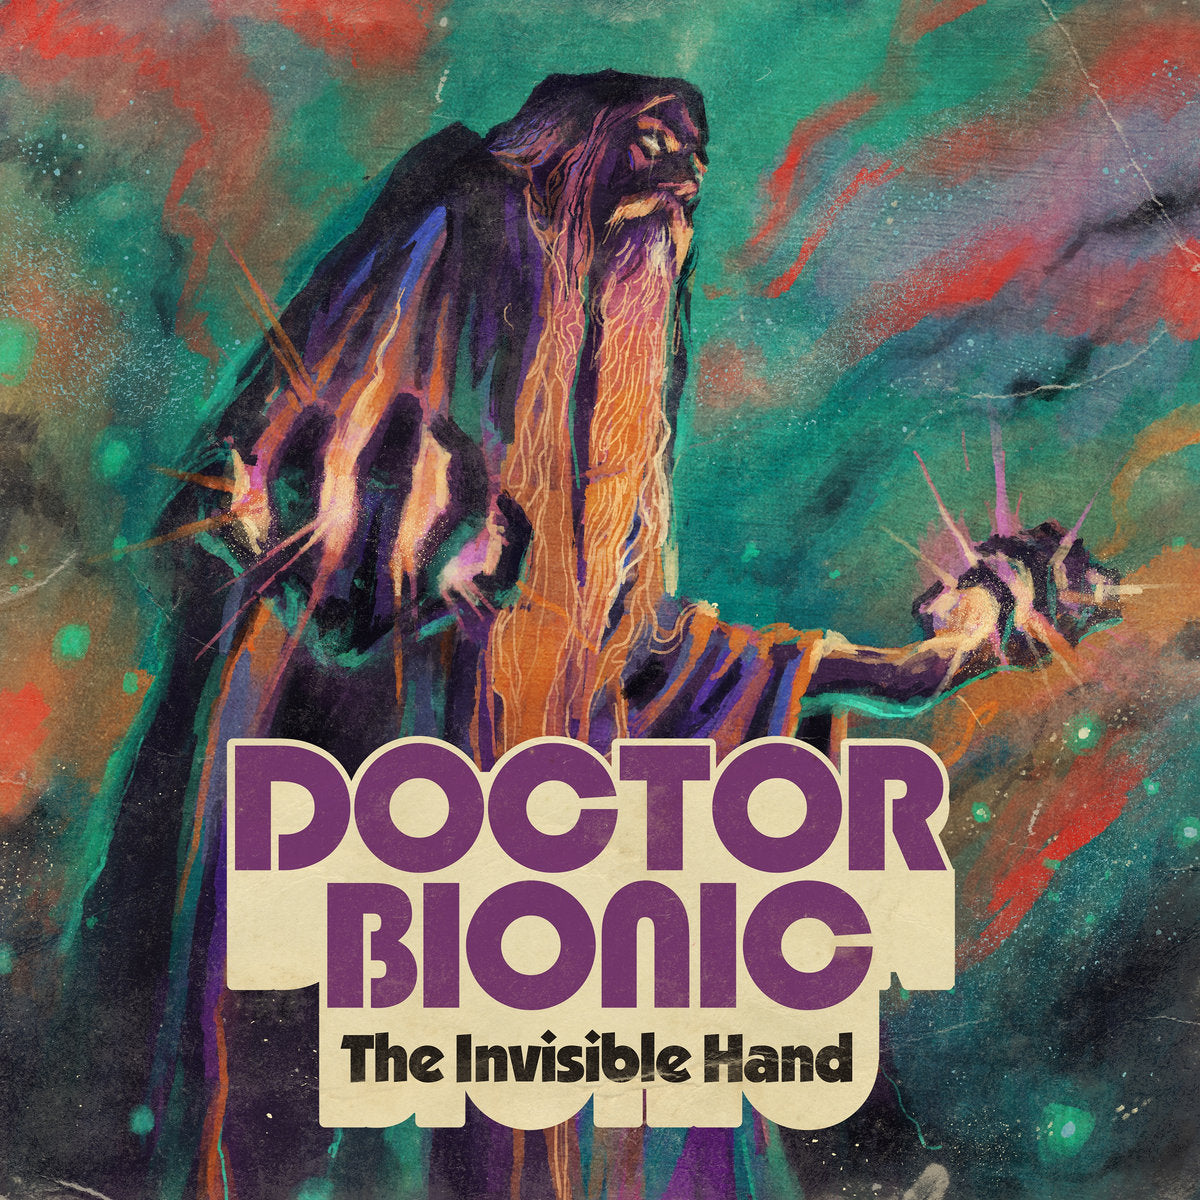 Doctor Bionic "The Invisible Hand" LP